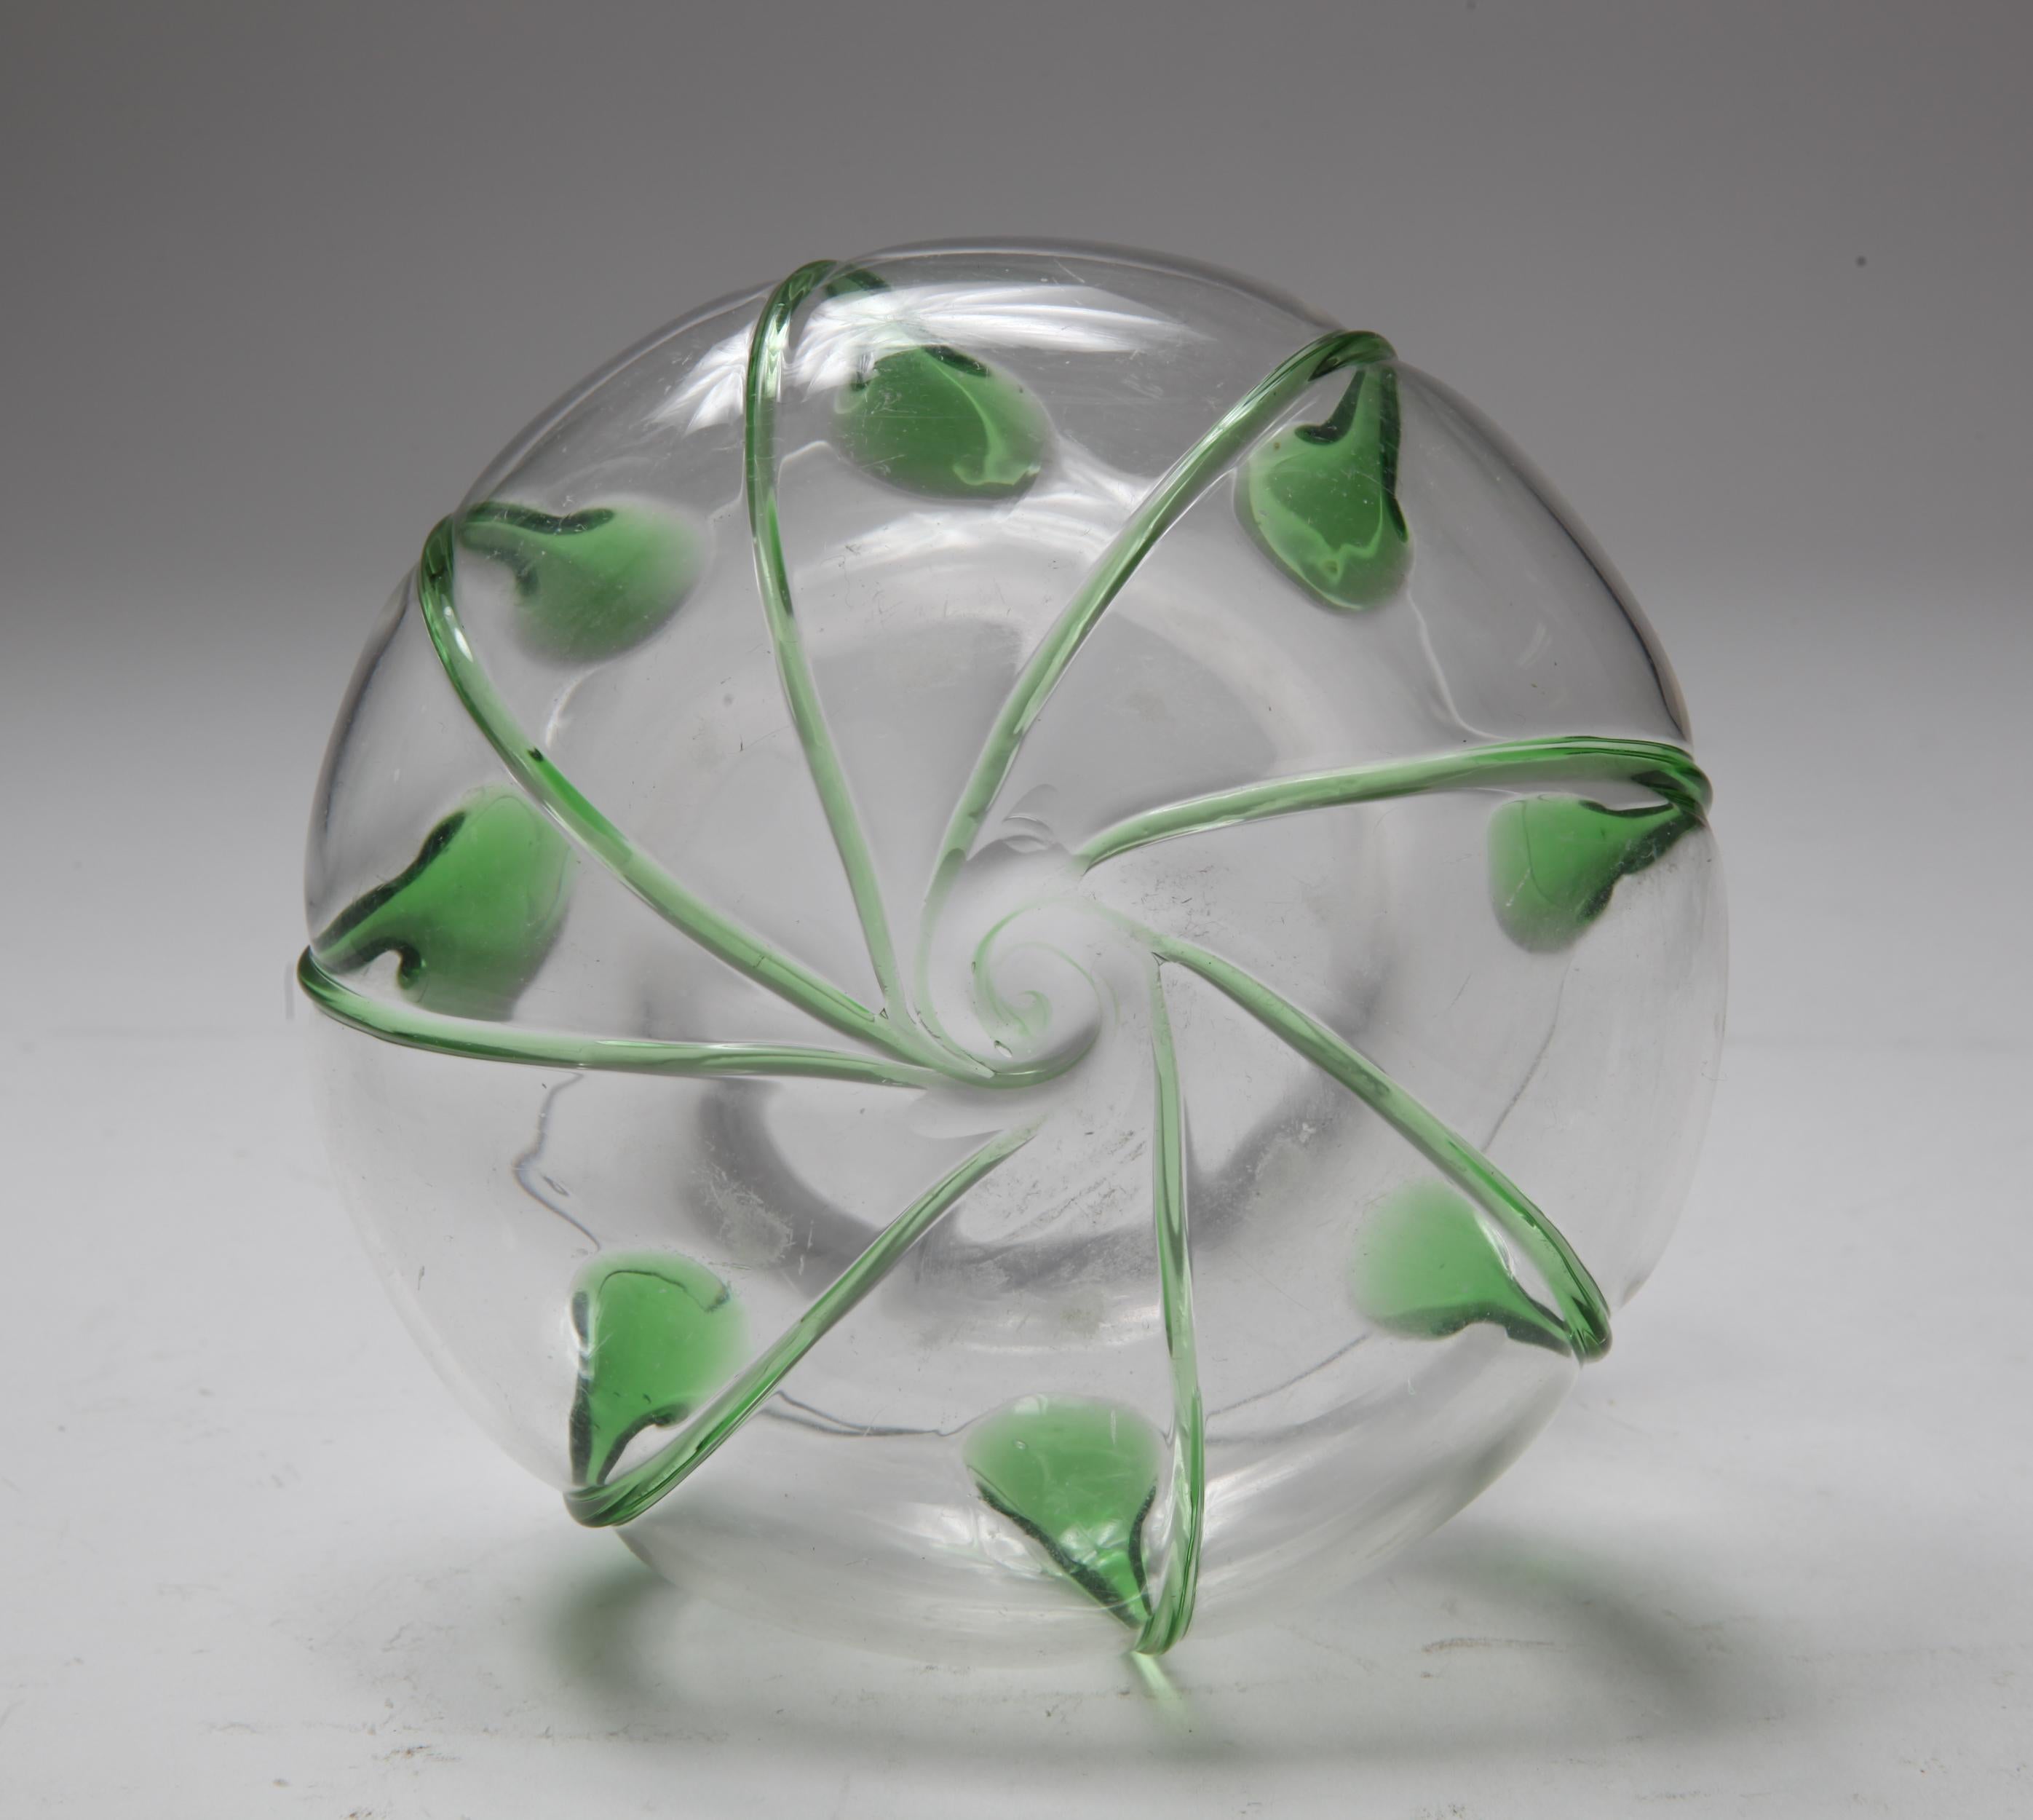 European Art Nouveau Style Glass Bowl with Green Accents For Sale